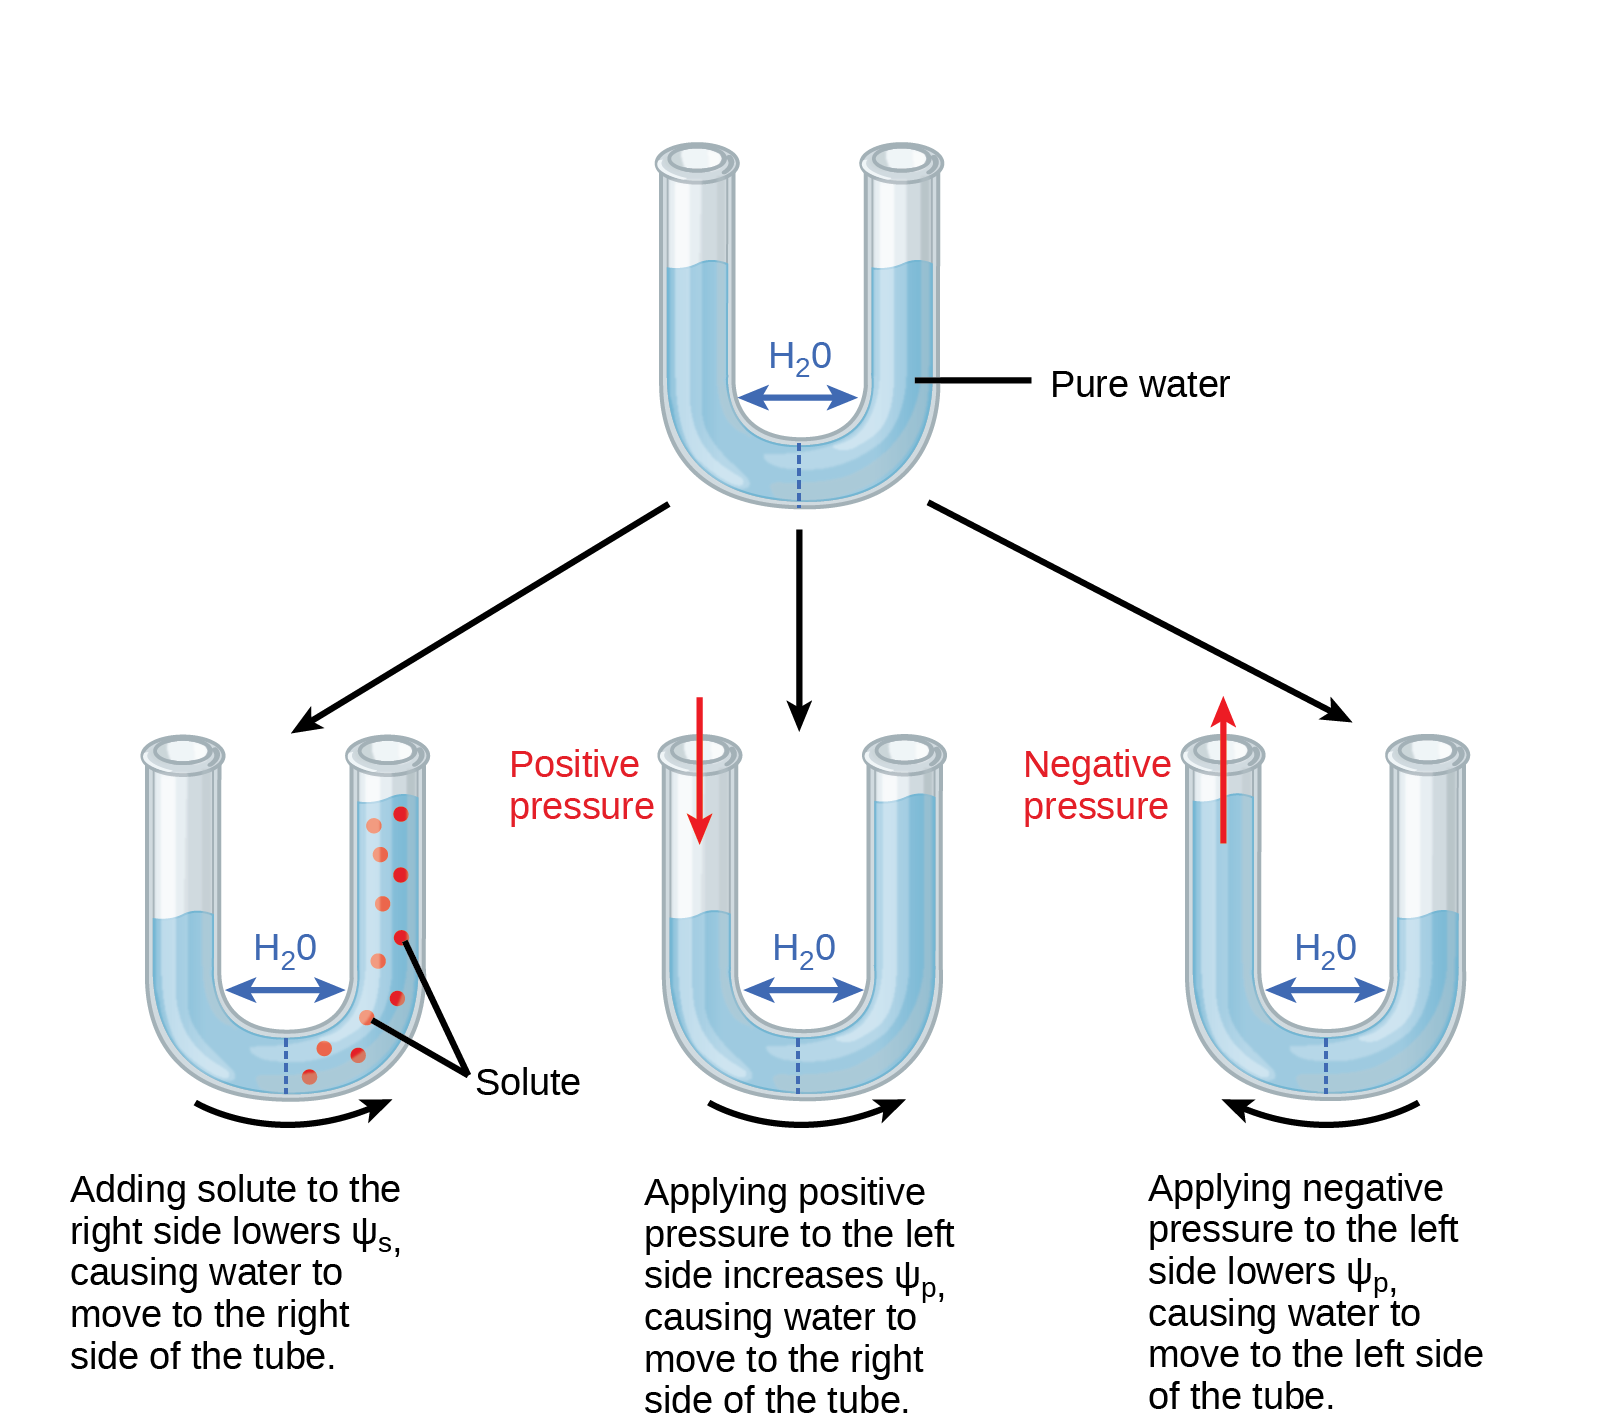 Illustration shows a U-shaped tube holding pure water. A semipermeable membrane, which allows water but not solutes to pass, separates the two sides of the tube. The water level on each side of the tube is the same. Beneath this tube are three more tubes, also divided by semipermeable membranes. In the first tube, solute has been added to the right side. Adding solute to the right side lowers psi-s, causing water to move to the right side of the tube. As a result, the water level is higher on the right side. The second tube has pure water on both sides of the membrane. Positive pressure is applied to the left side. Applying positive pressure to the left side causes psi-p to increase. As a results, water moves to the right so that the water level is higher on the right than on the left. The third tube also has pure water, but this time negative pressure is applied to the left side. Applying negative pressure lowers psi-p, causing water to move to the left side of the tube. As a result, the water level is higher on the left.